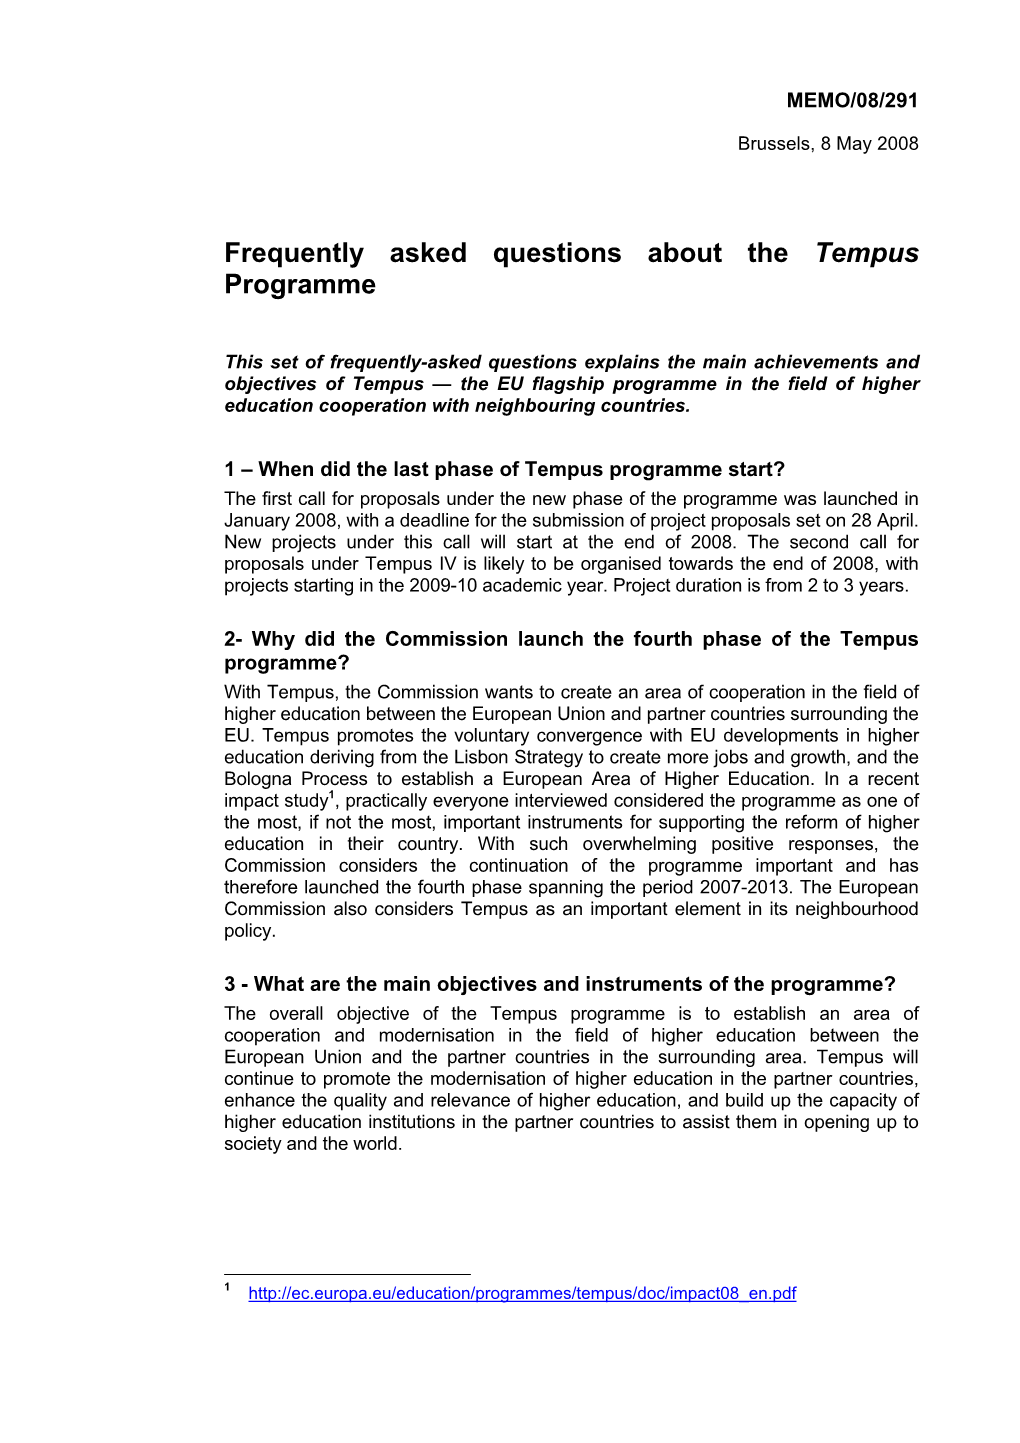 Frequently Asked Questions About the Tempus Programme